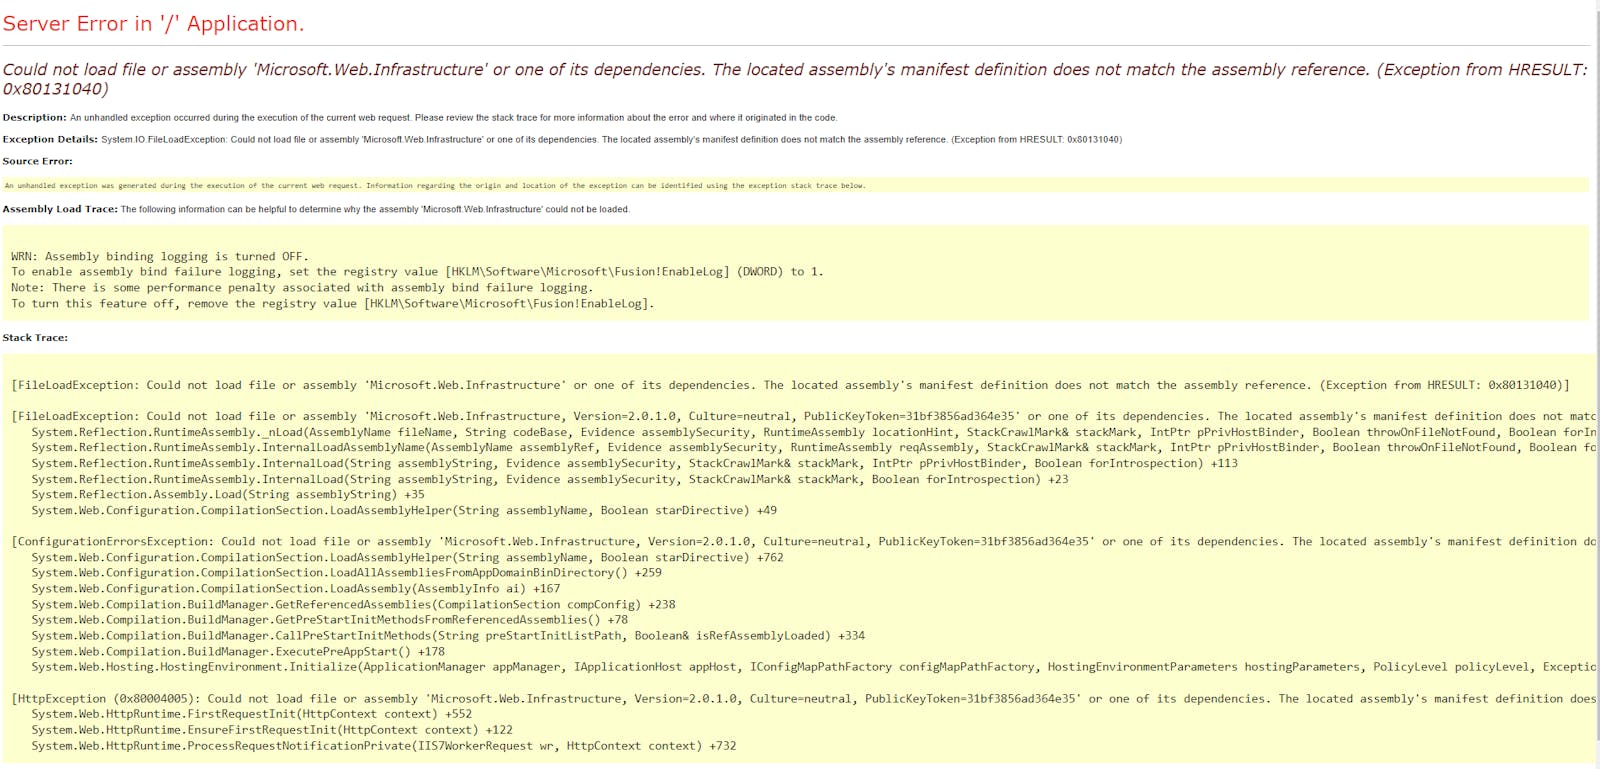 Could not load file or assembly 'Microsoft.Web.Infrastructure' or one of its dependencies.